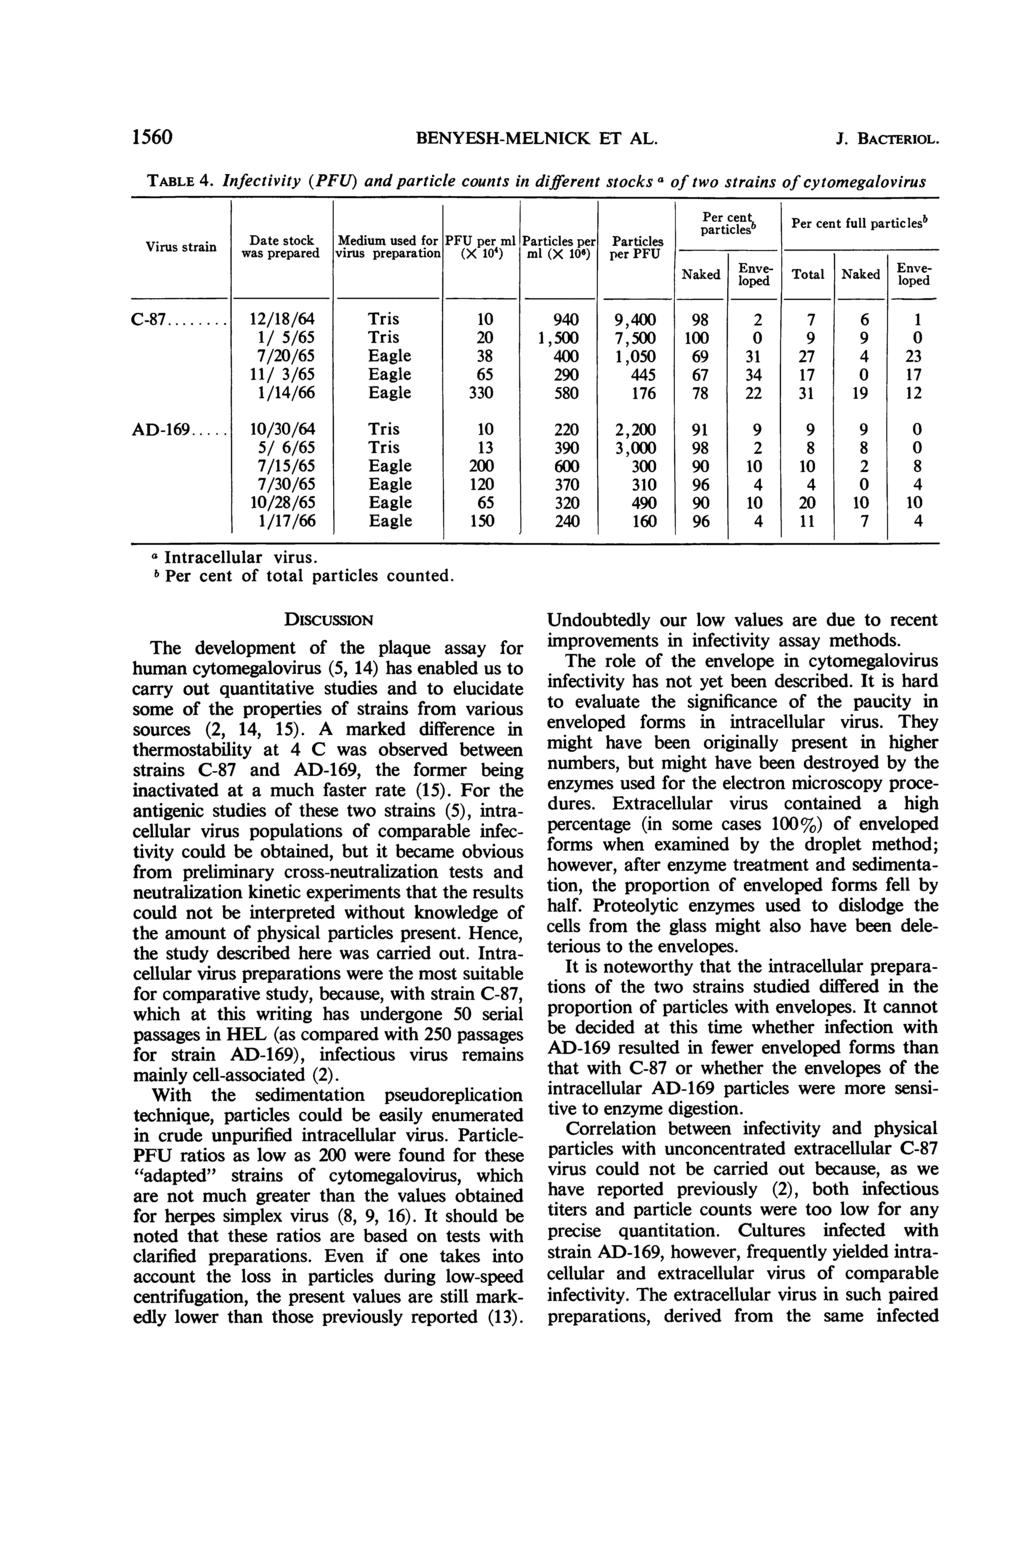 56 BENYESH-MELNICK ET AL. J. BACTERIOL. TABLE. Infectivity (PFU) and particle counts in different stocks a of two strains of cytomegalovirus Virus strain C-87... AD-6.